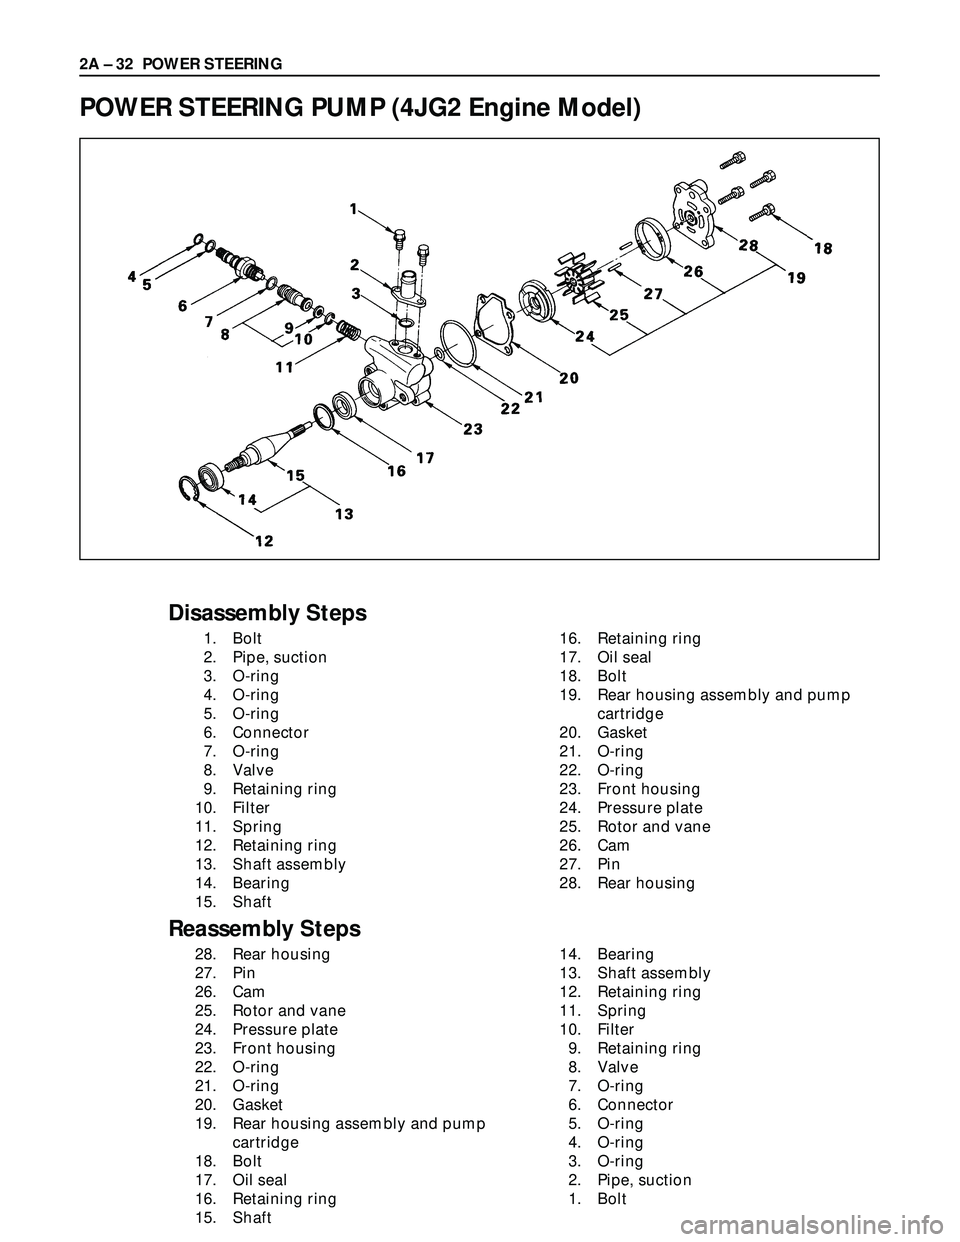 ISUZU TROOPER 1998  Service Repair Manual 2A – 32 POWER STEERING
POWER STEERING PUMP (4JG2 Engine Model)
Disassembly Steps
1. Bolt
2. Pipe, suction
3. O-ring
4. O-ring
5. O-ring
6. Connector
7. O-ring
8. Valve
9. Retaining ring
10. Filter
1